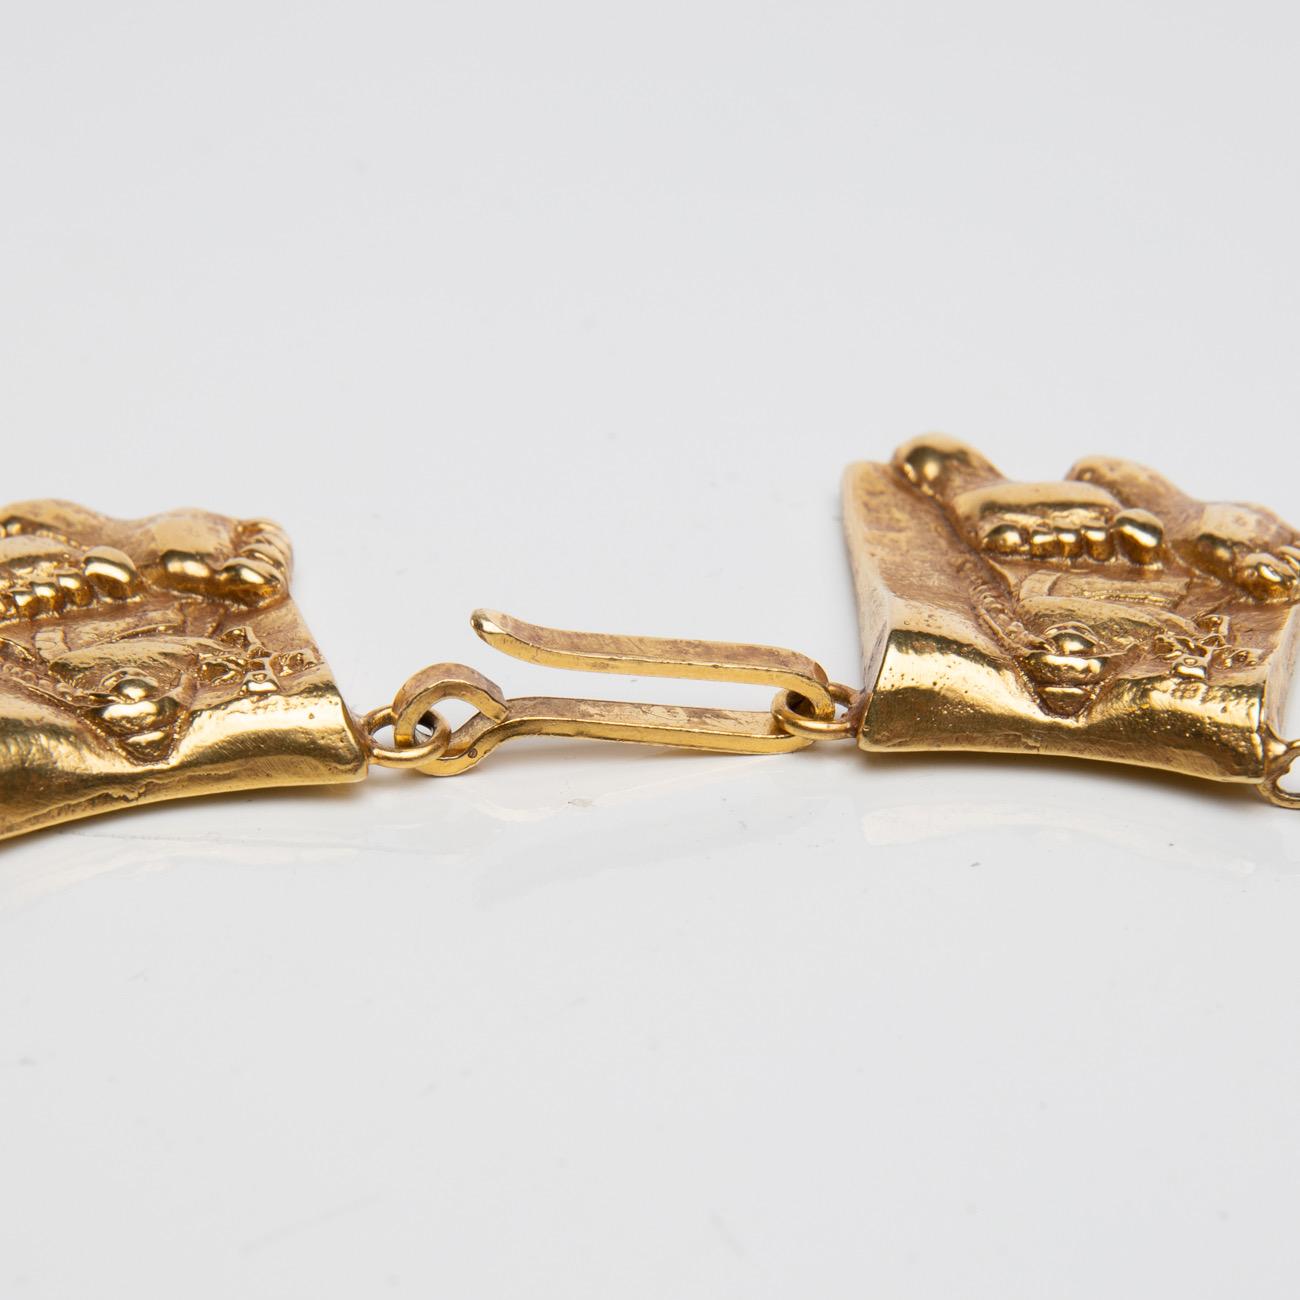 This gilded bronze necklace is made up of 15 links and a clasp. 
Each link represents Line Vautrin's vision of Berthe aux grands pieds (Berthe with big feet). 
To the left of her face, a monogram of Charlemagne is represented. 
 
Berthe aux grands